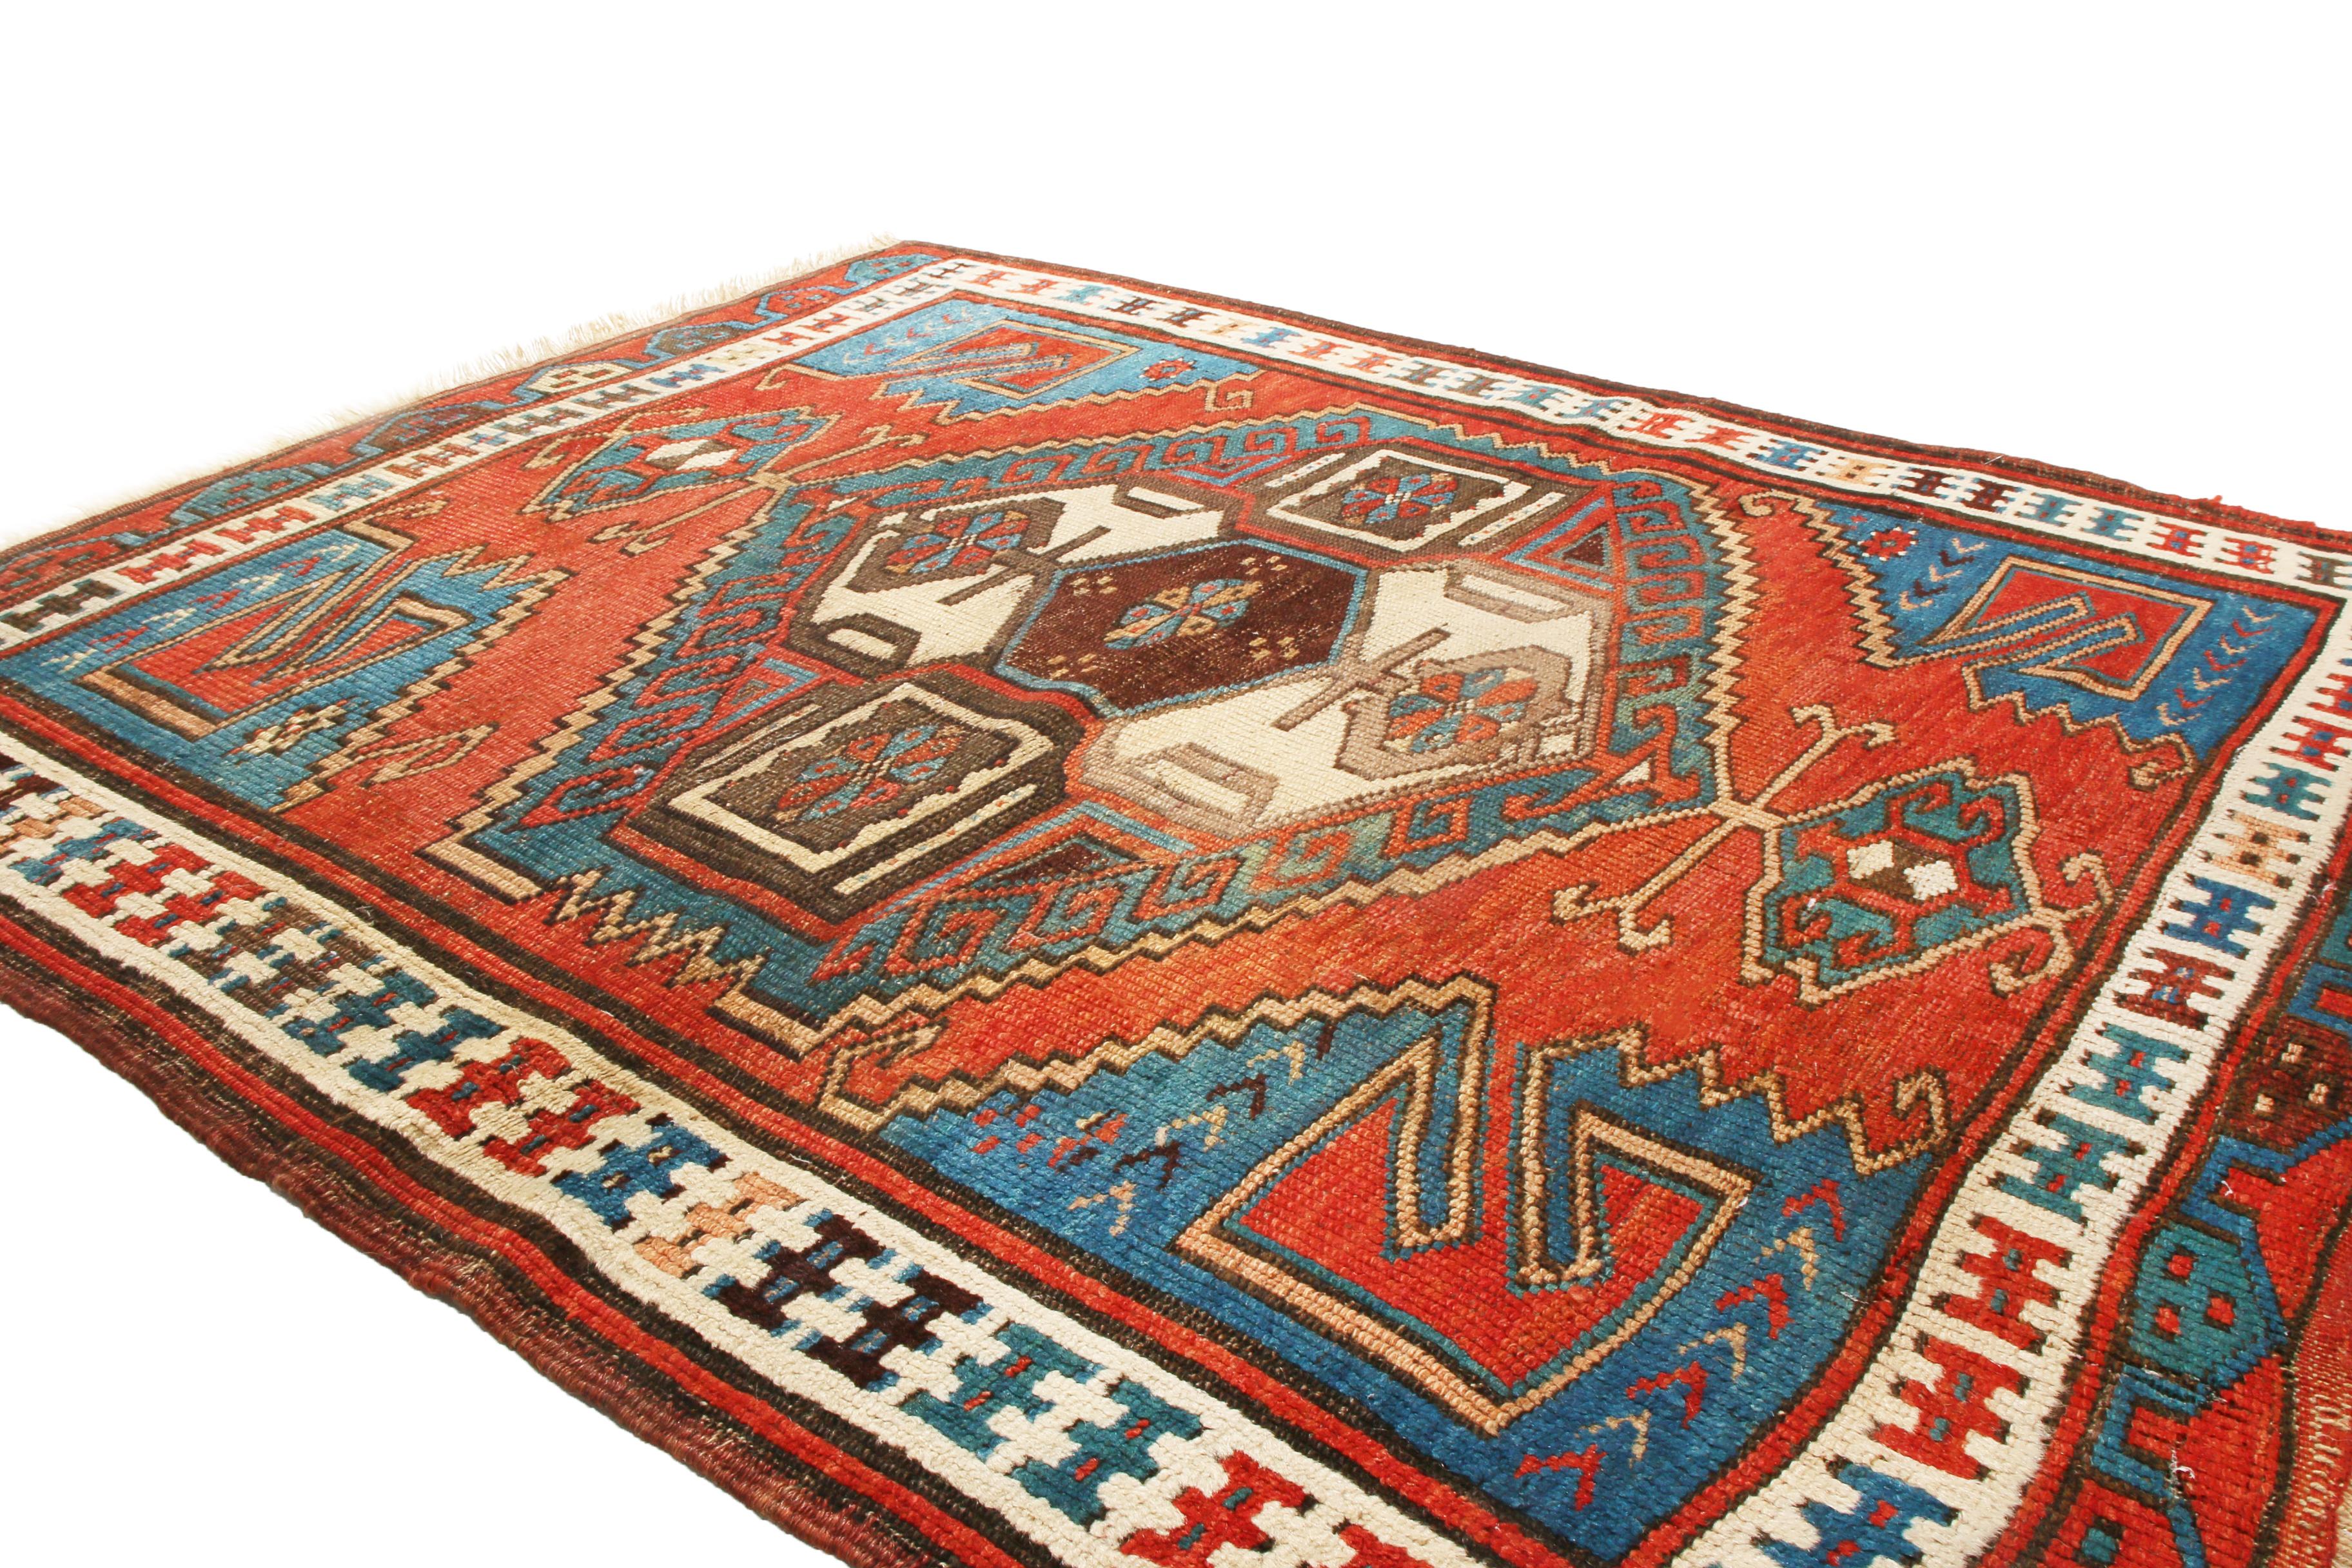 Originating from Turkey between 1900-1920, this antique traditional Turkish rug is of a Bergama design with geometric and floral inspirations. Hand knotted in high-quality wool, these beige, brown, blue, and red geometric gul patterns are